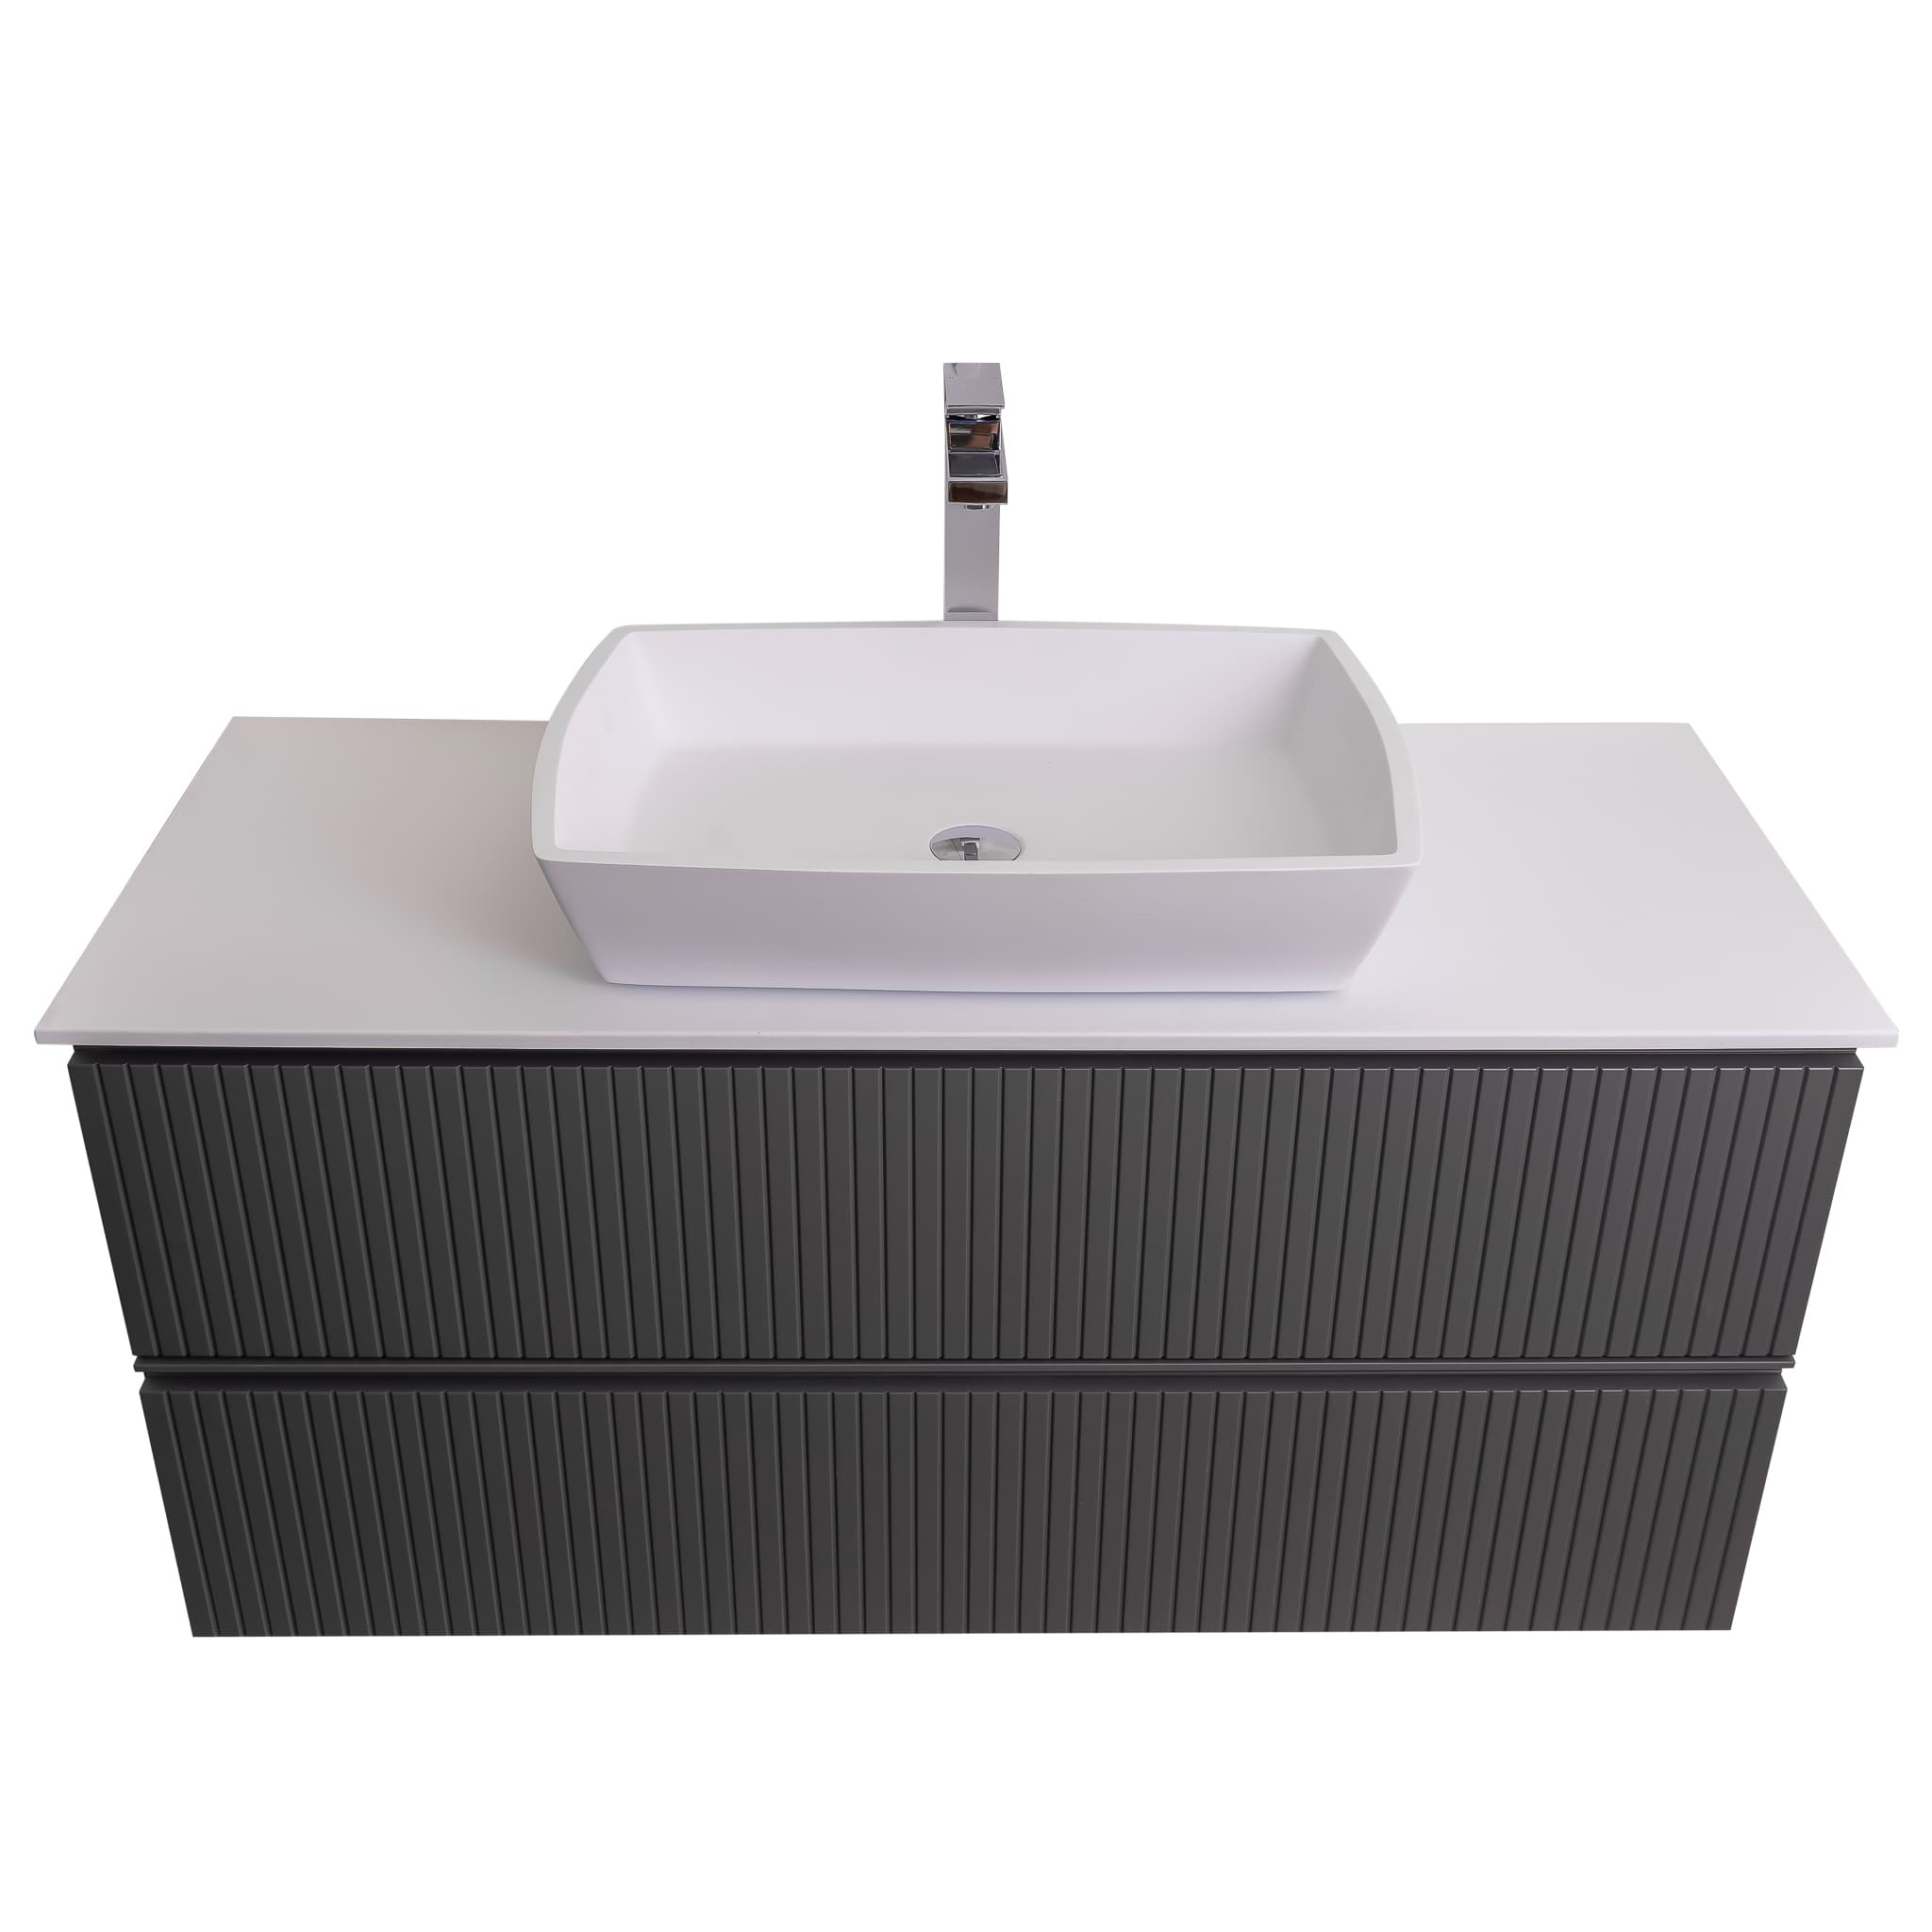 Ares 47.5 Matte Grey Cabinet, Solid Surface Flat White Counter And Square Solid Surface White Basin 1316, Wall Mounted Modern Vanity Set